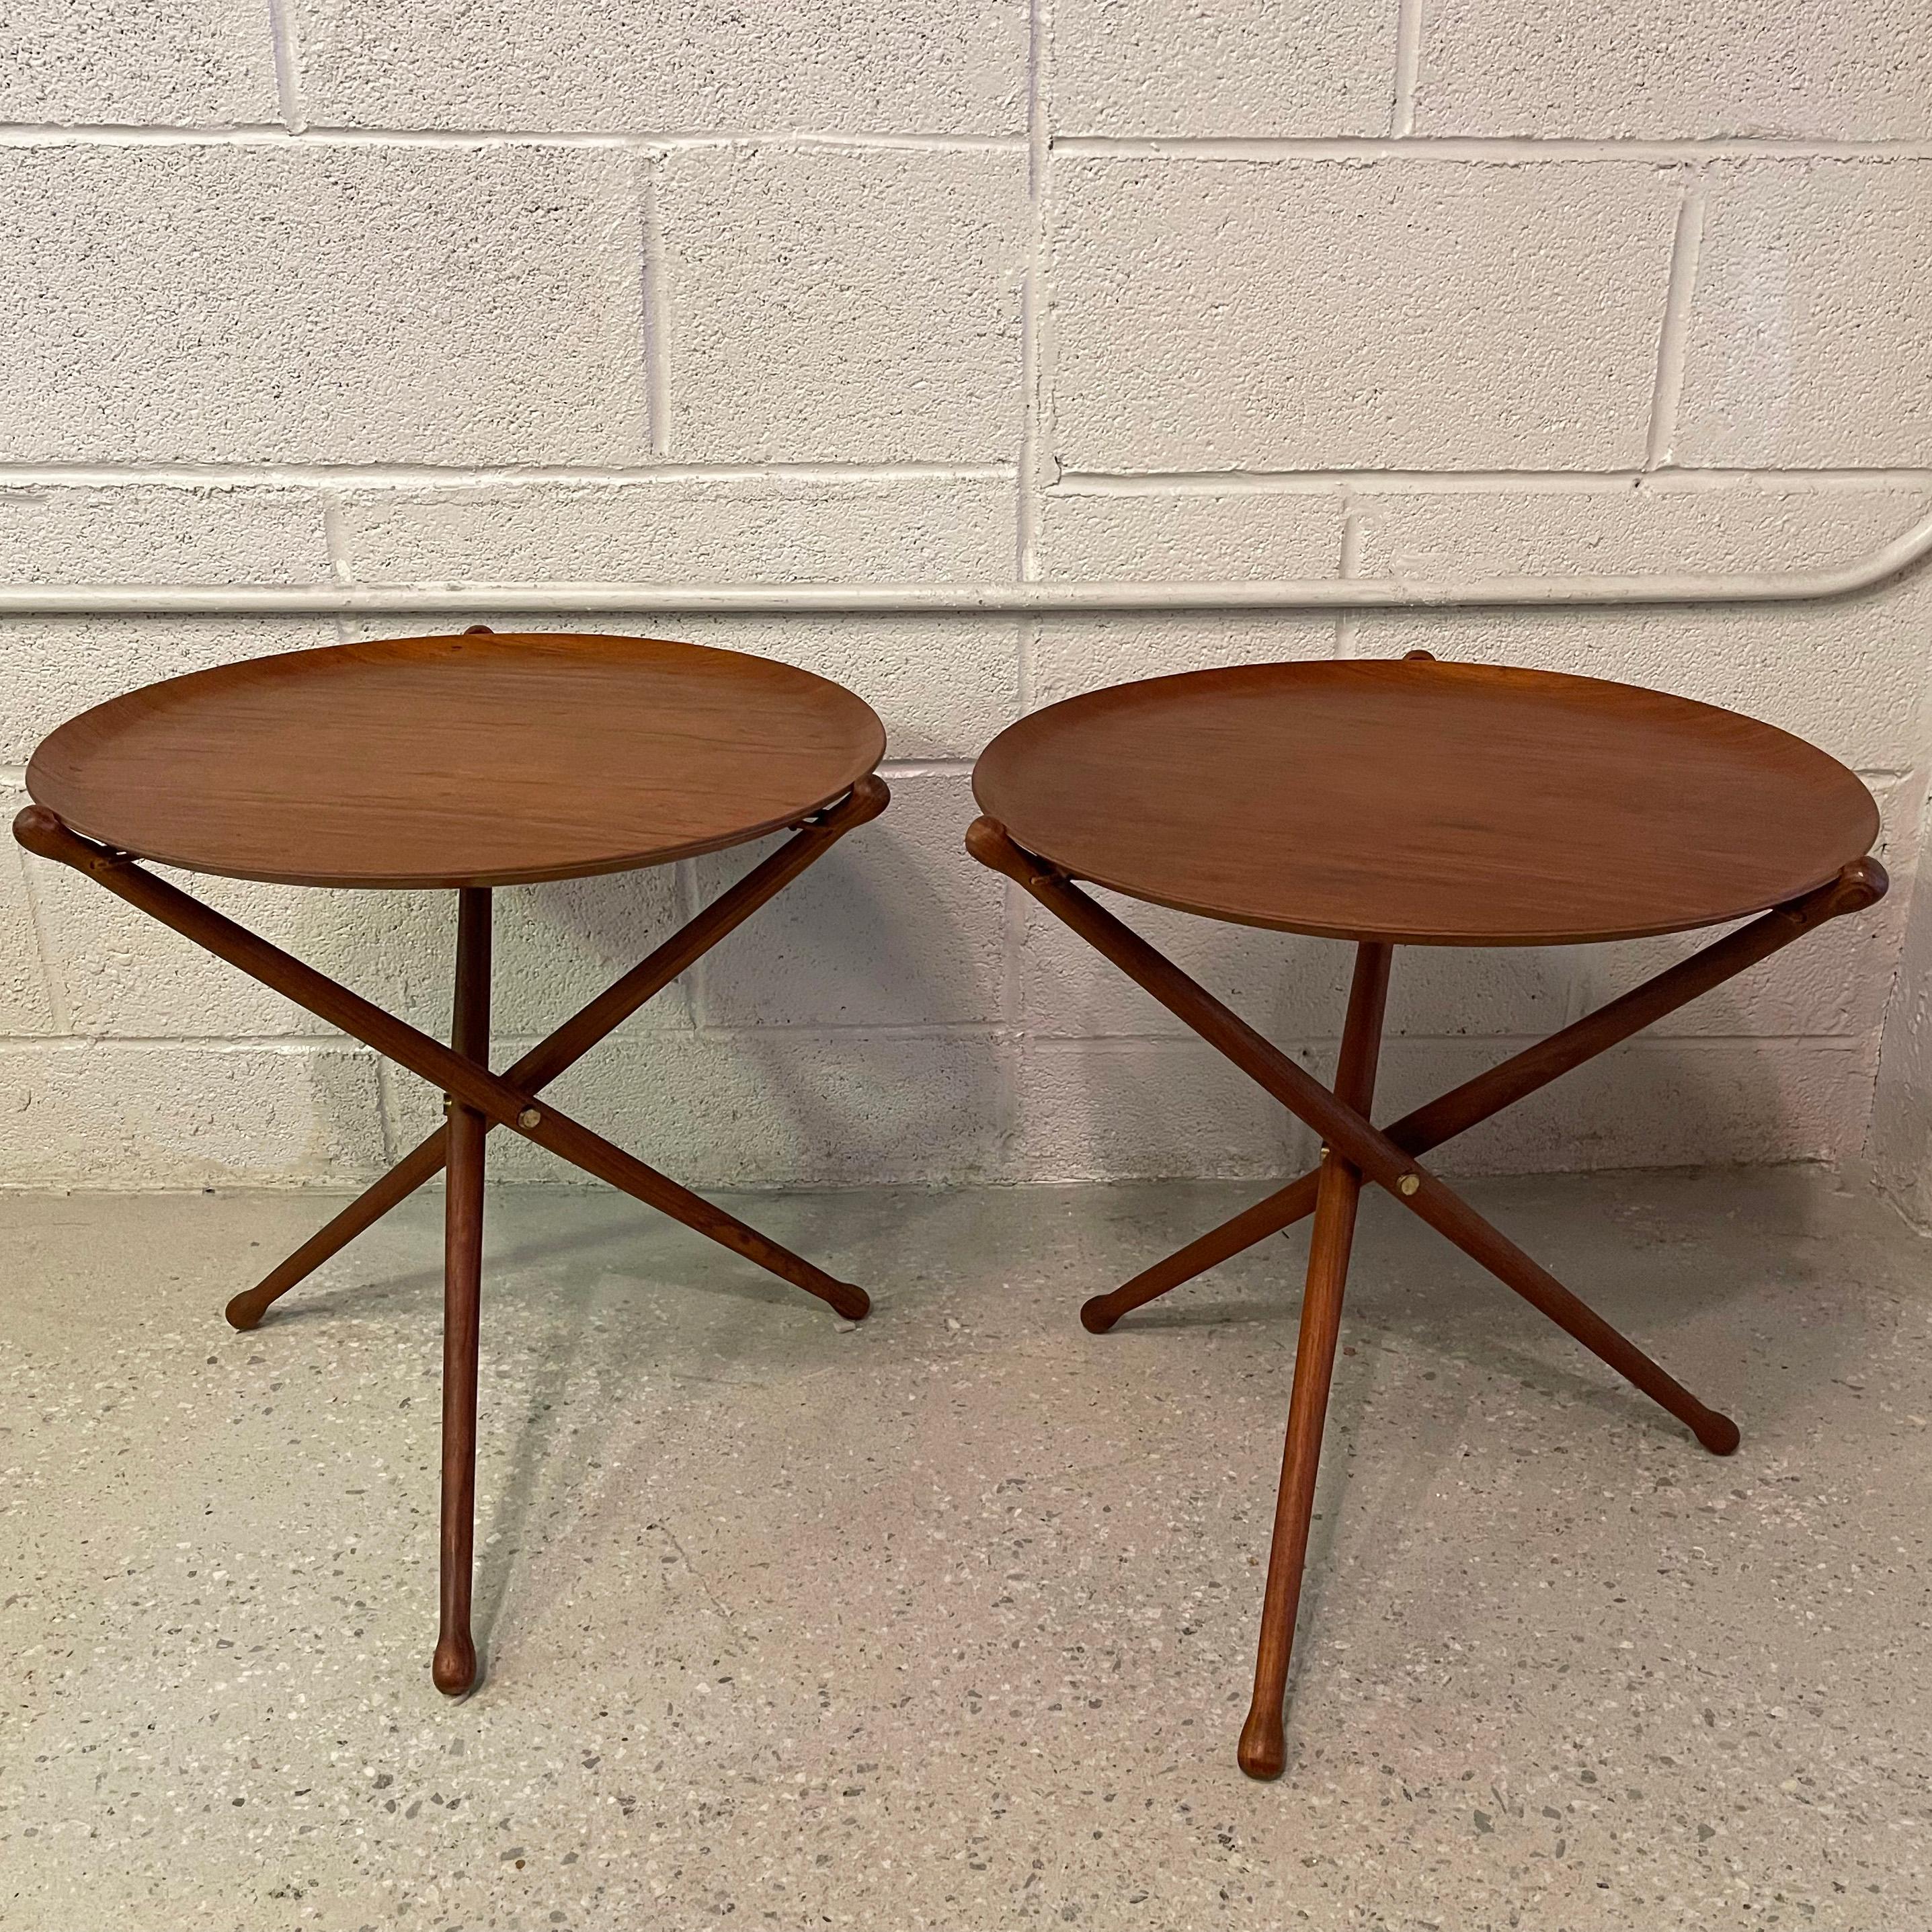 Scandinavian Modern Pair Of Teak Folding Tray Tables By Nils Trautner For Ary Nybro, Sweden For Sale